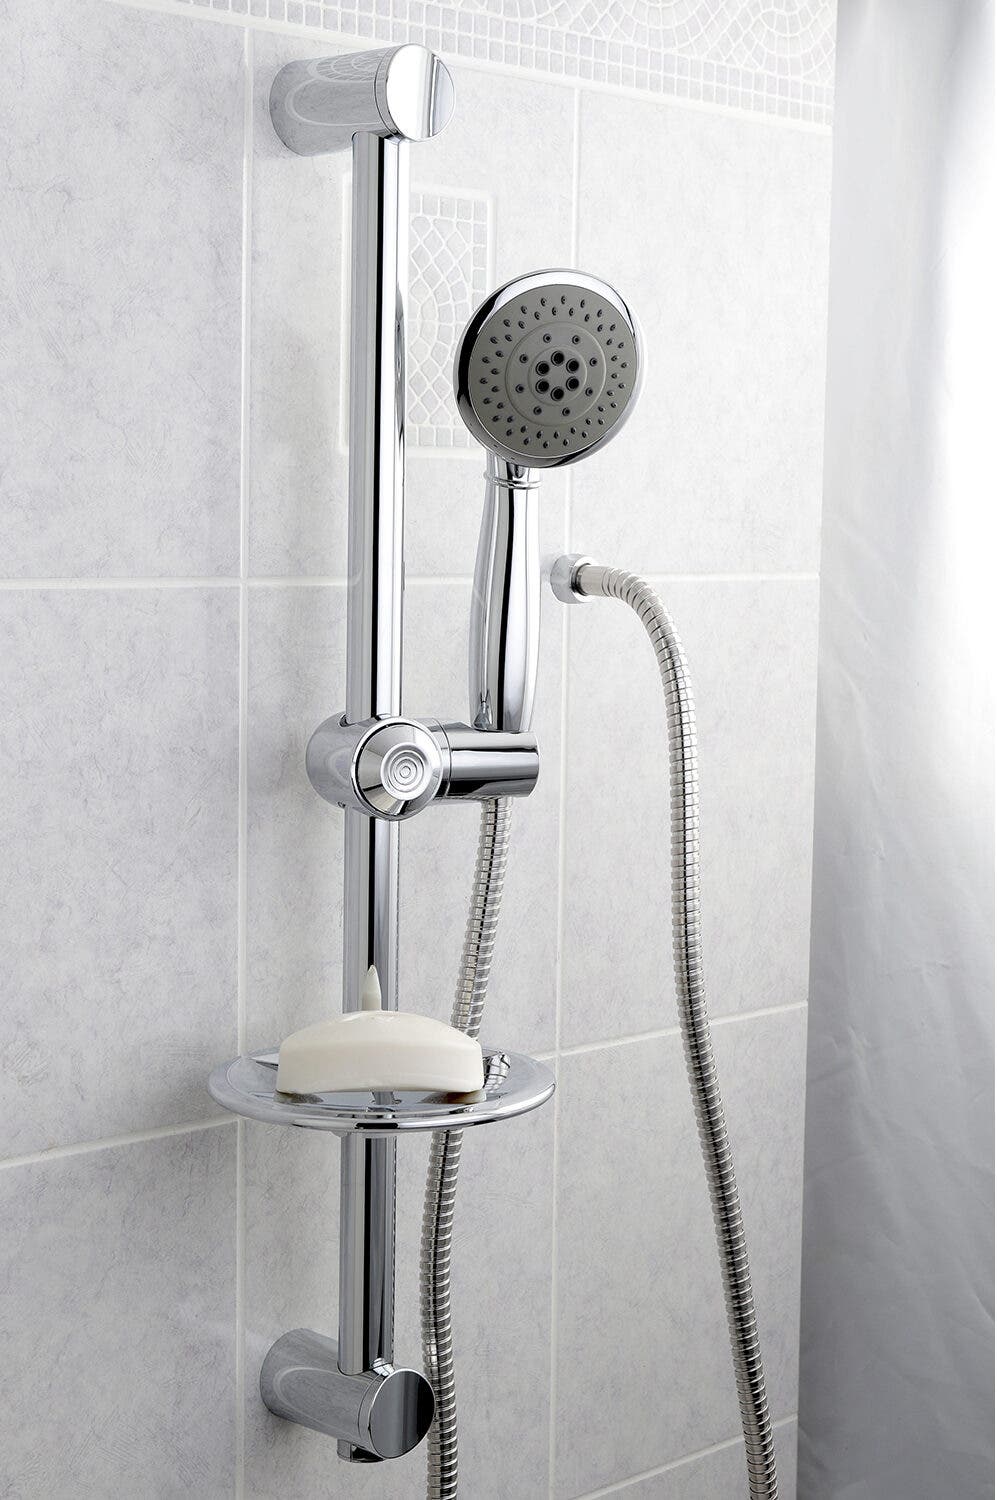 Why Shower Slide Bars are an Essential in Your Bathroom